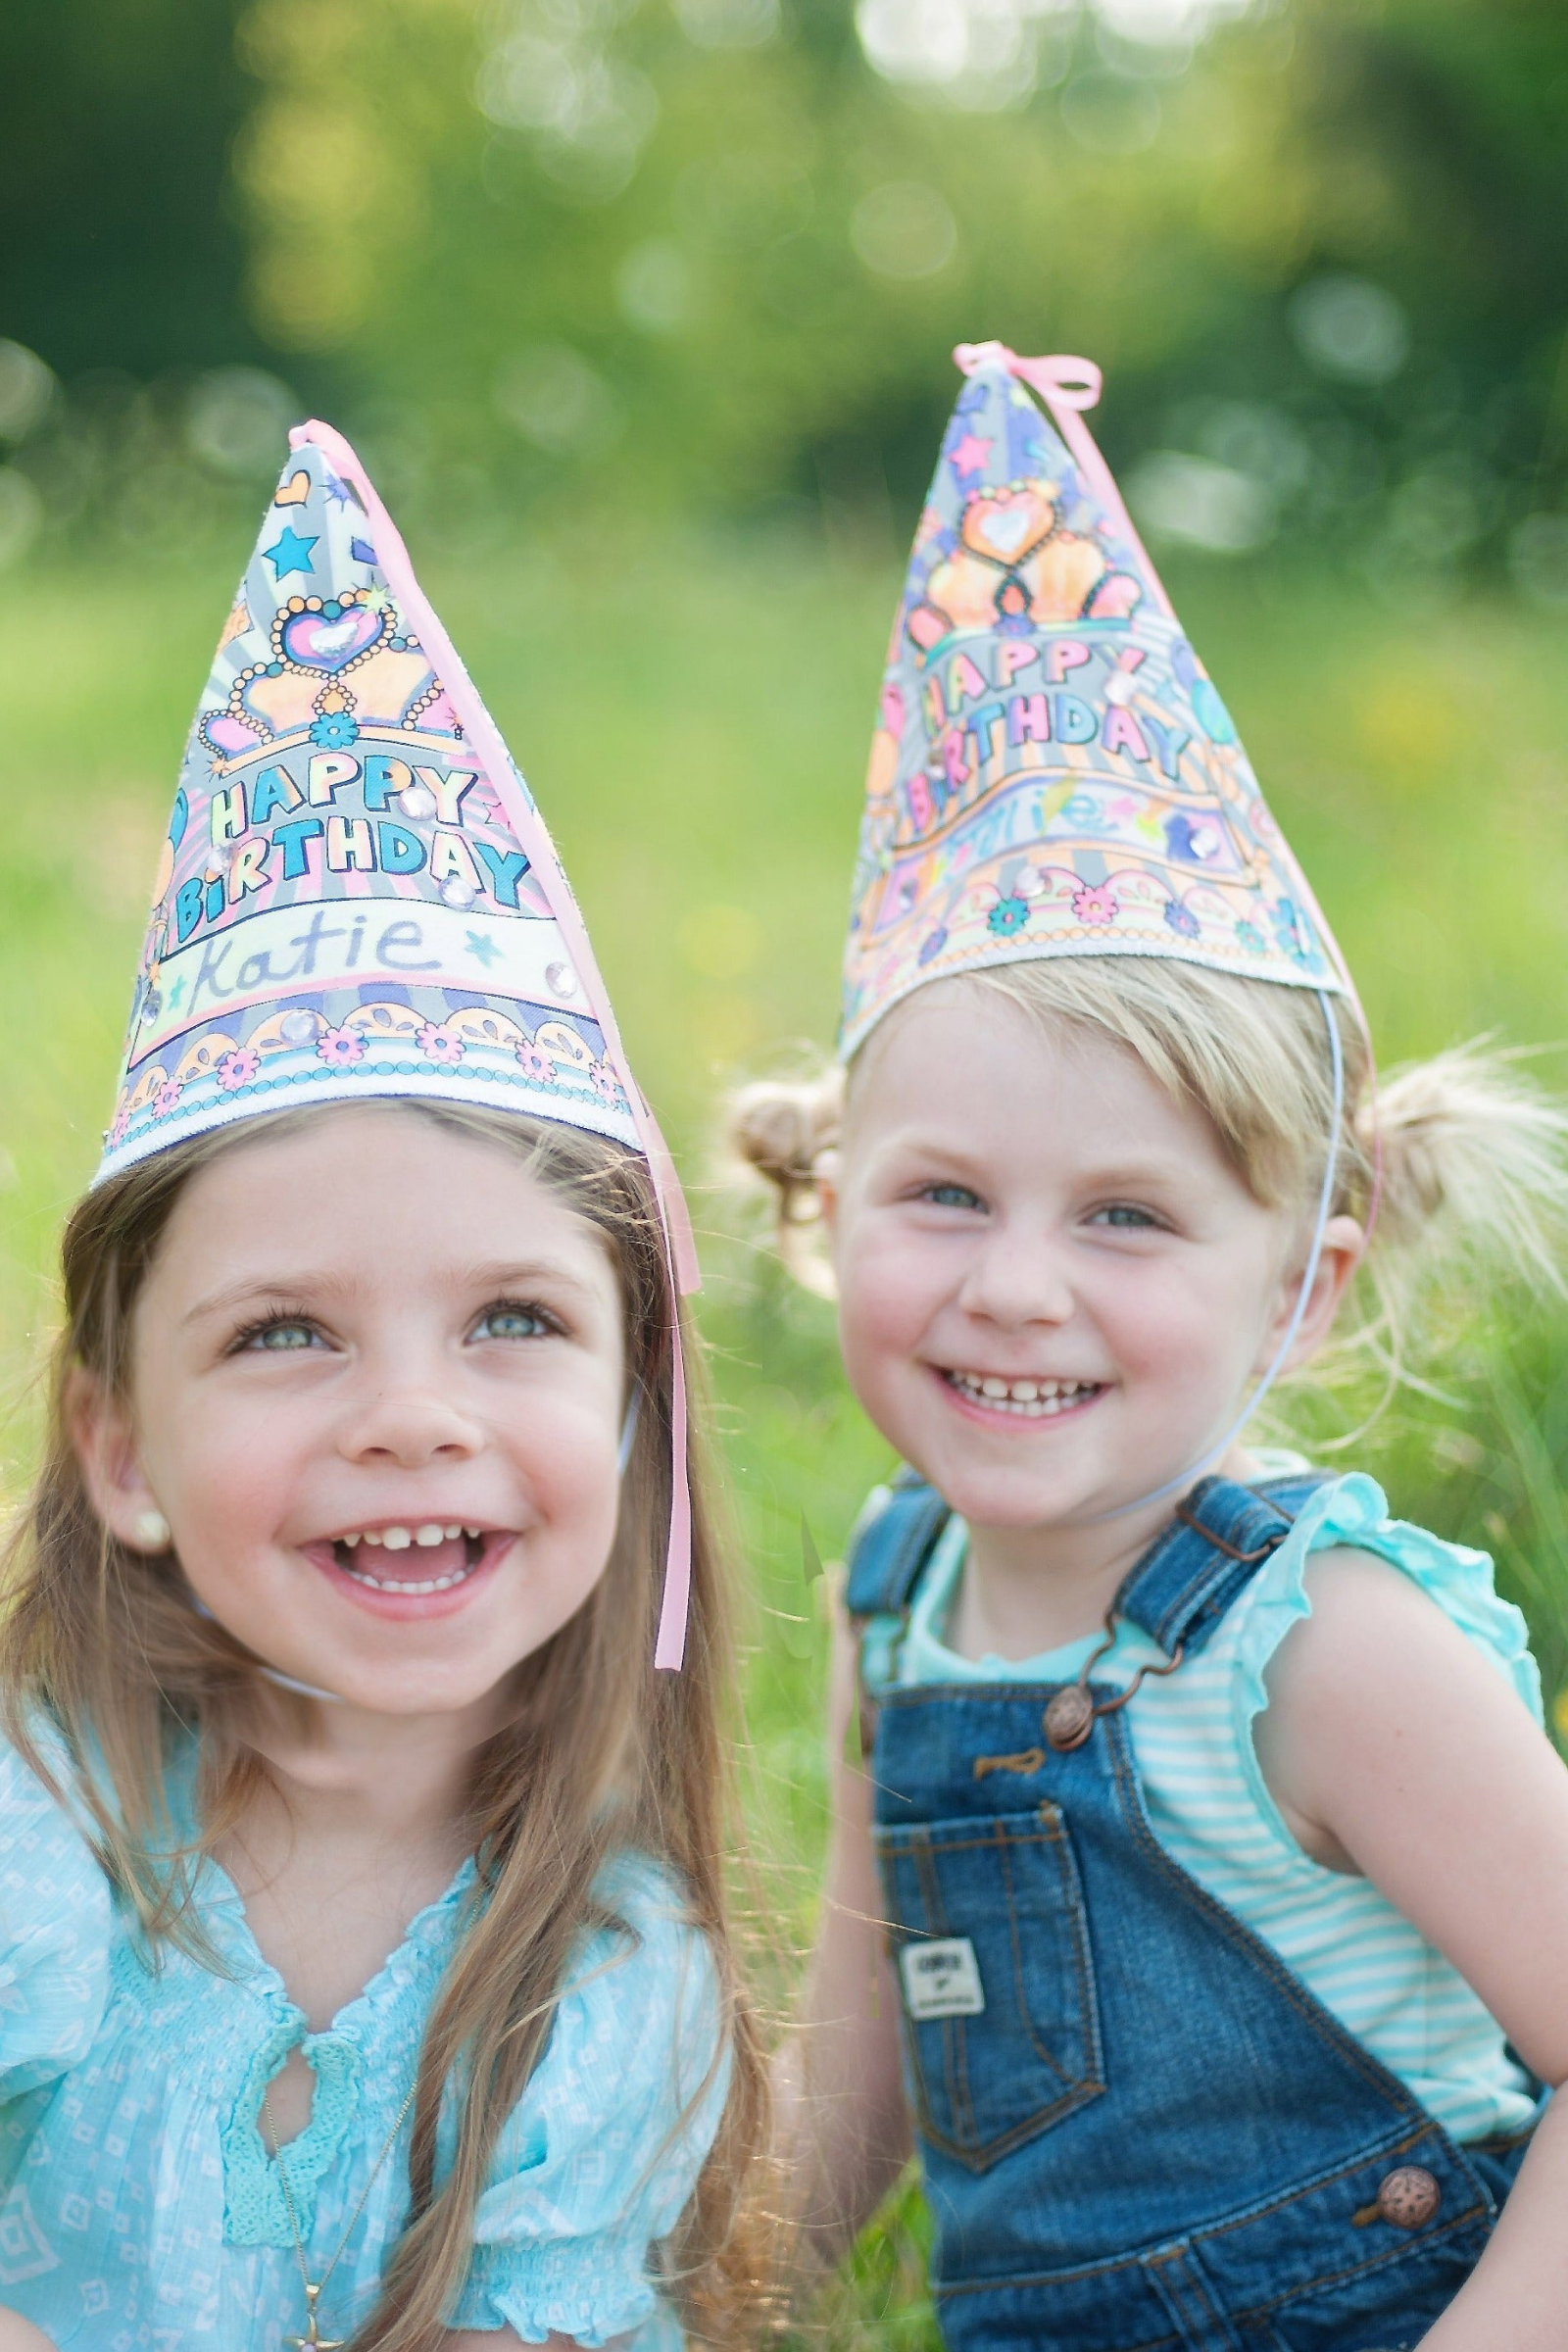 Colour A Birthday Hat - 4 Pack